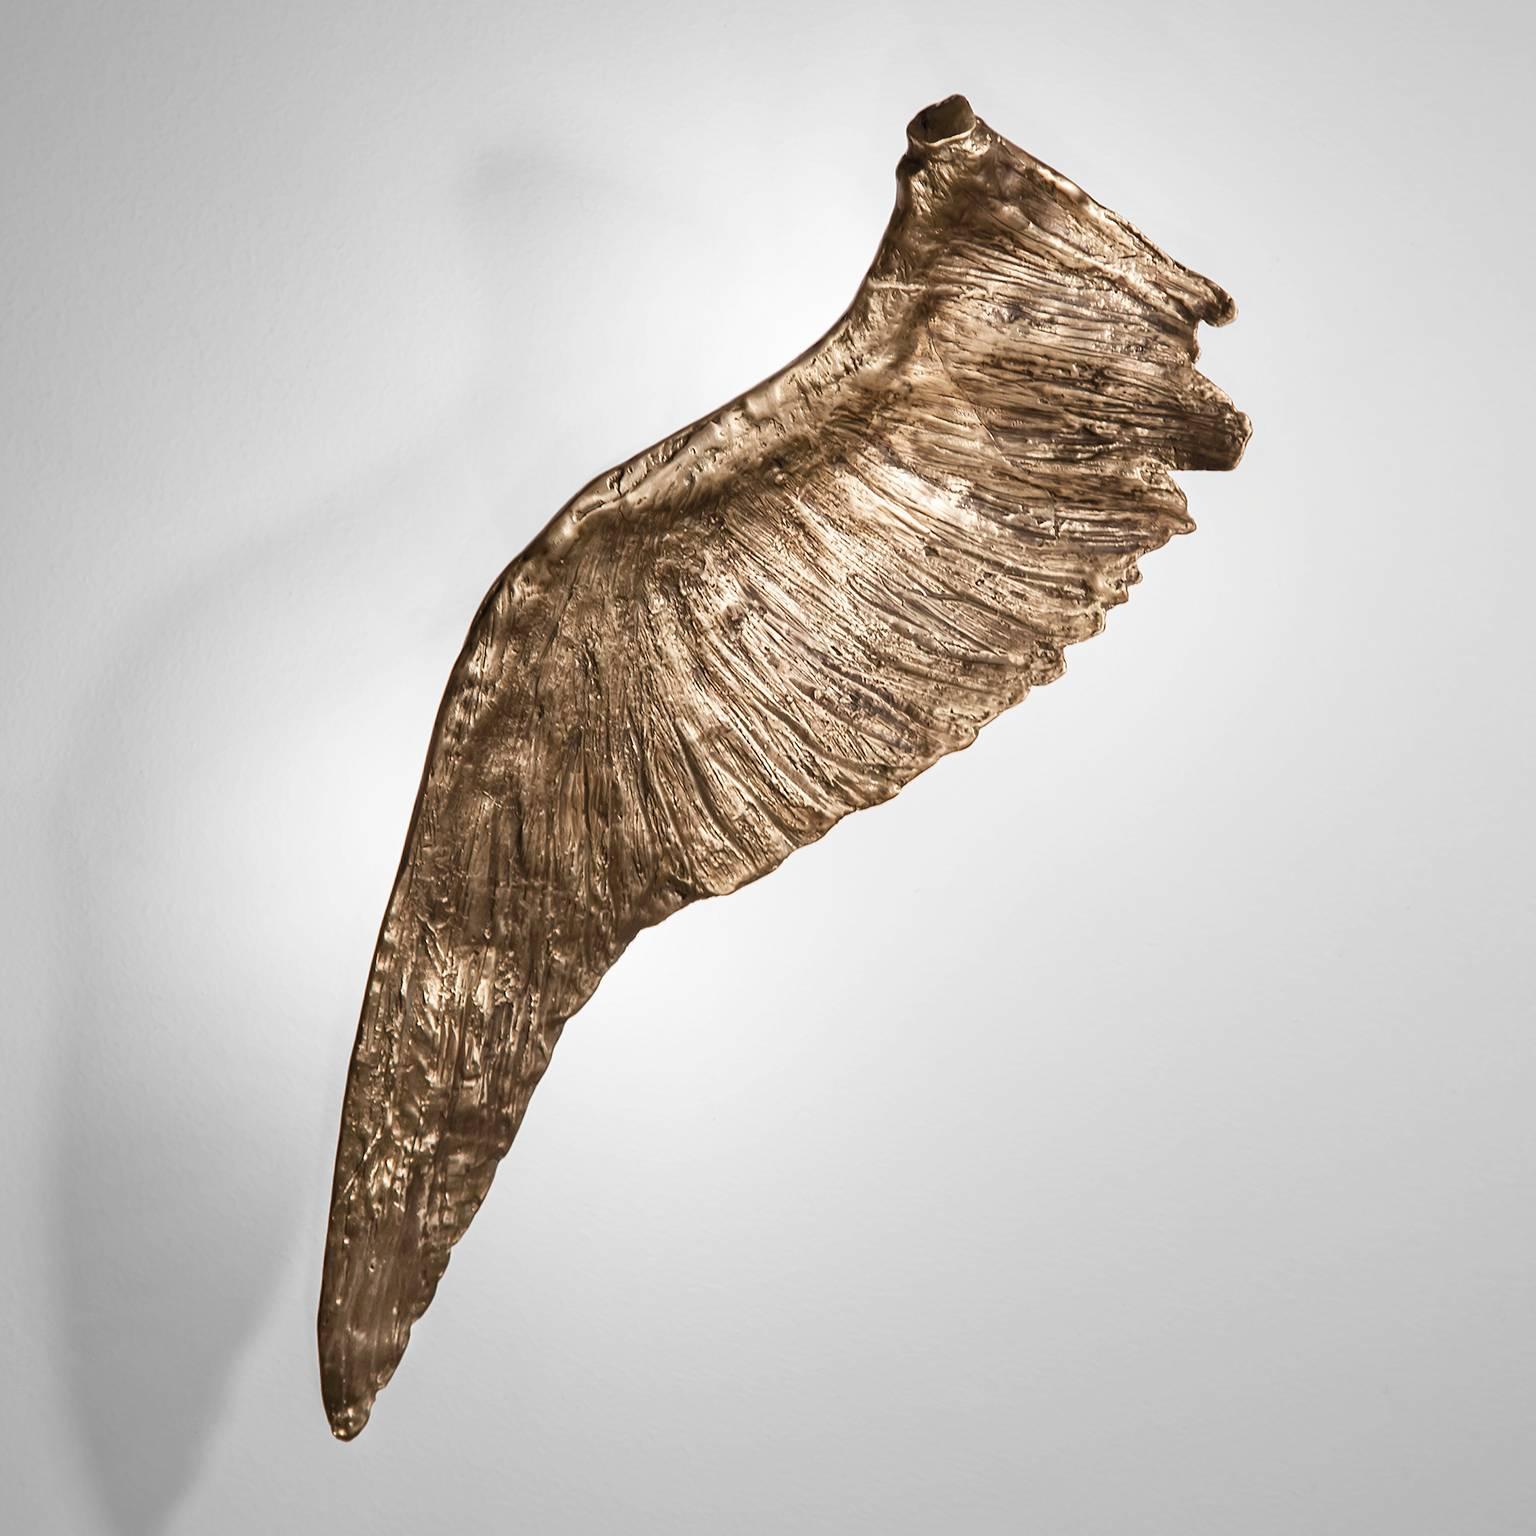 The 'Voltaire' wall sconce consists of a cast bronze wing sculpture inspired by the past and present using age old and modern techniques to create each piece. There is a left and right wing available and each has its unique details and slight